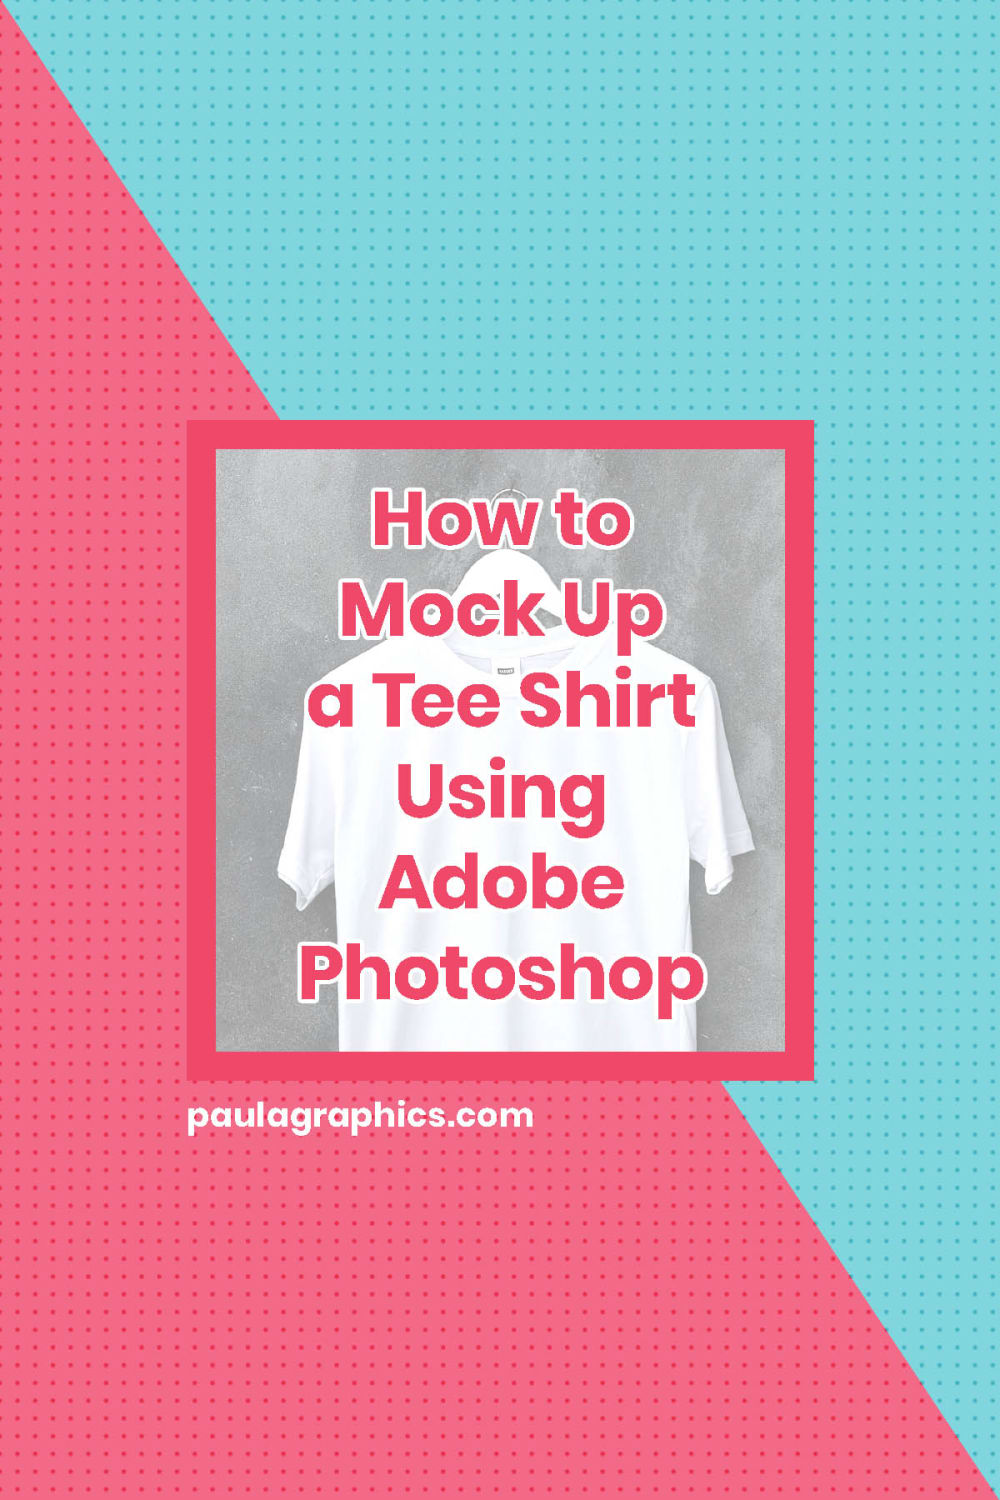 How to Mock Up a Tee Shirt Using Adobe Photoshop